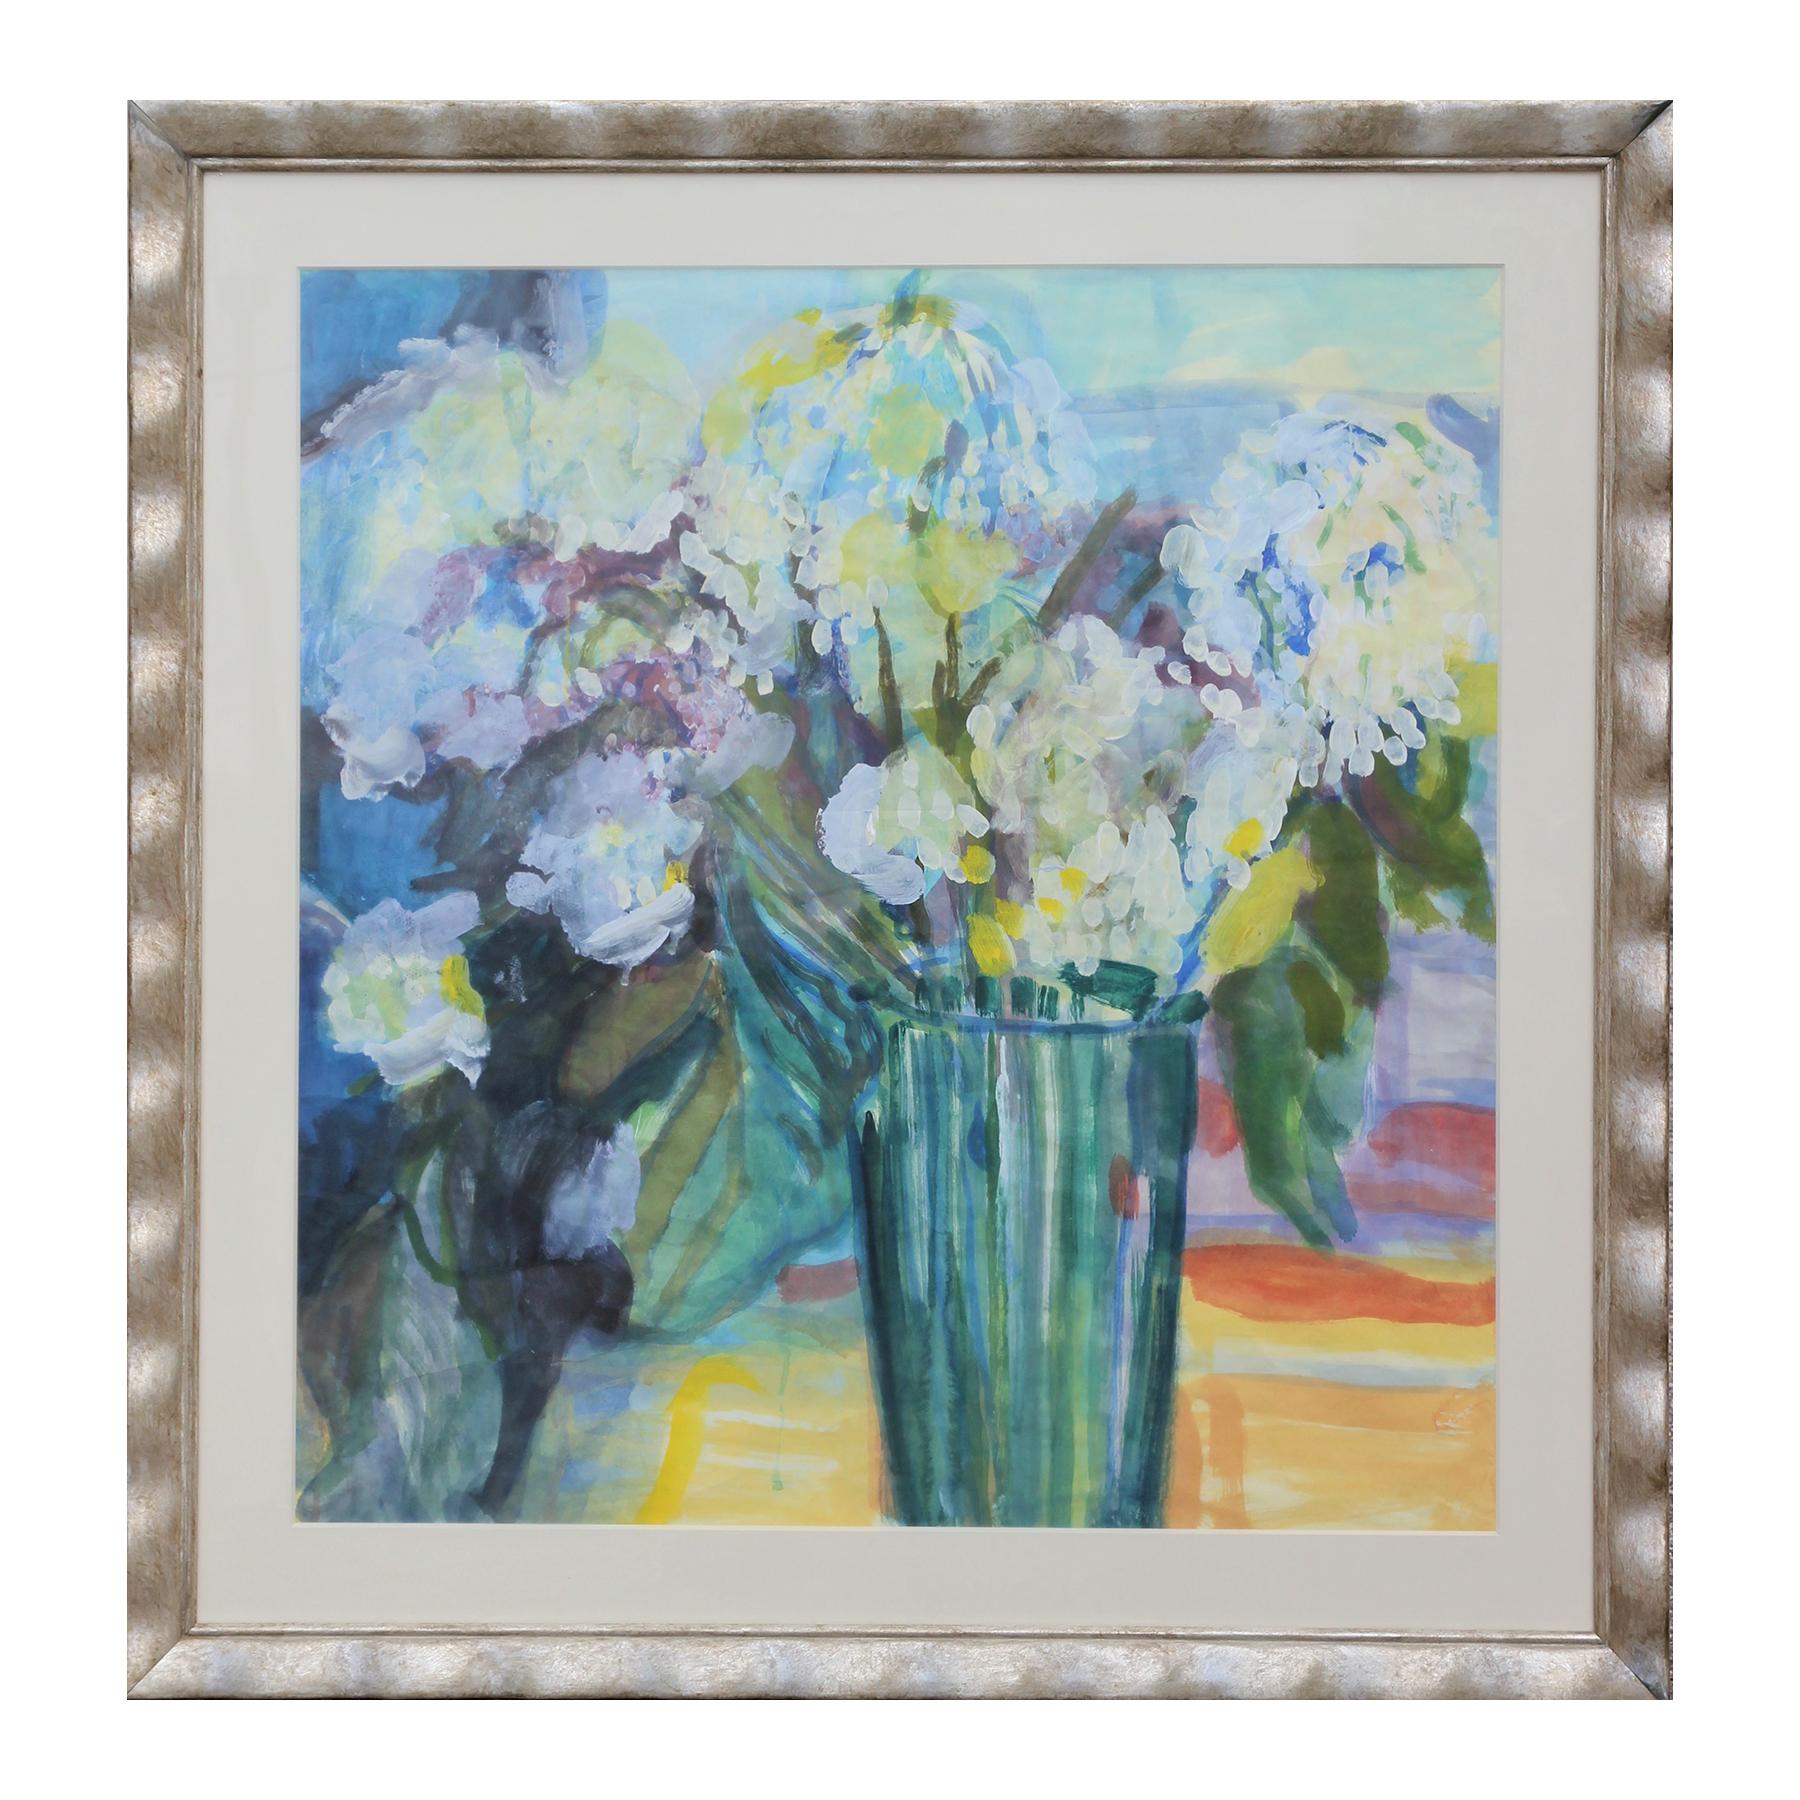 Unknown Interior Art - Blue & Green Pastel Toned Impressionistic Floral Watercolor Still Life Painting